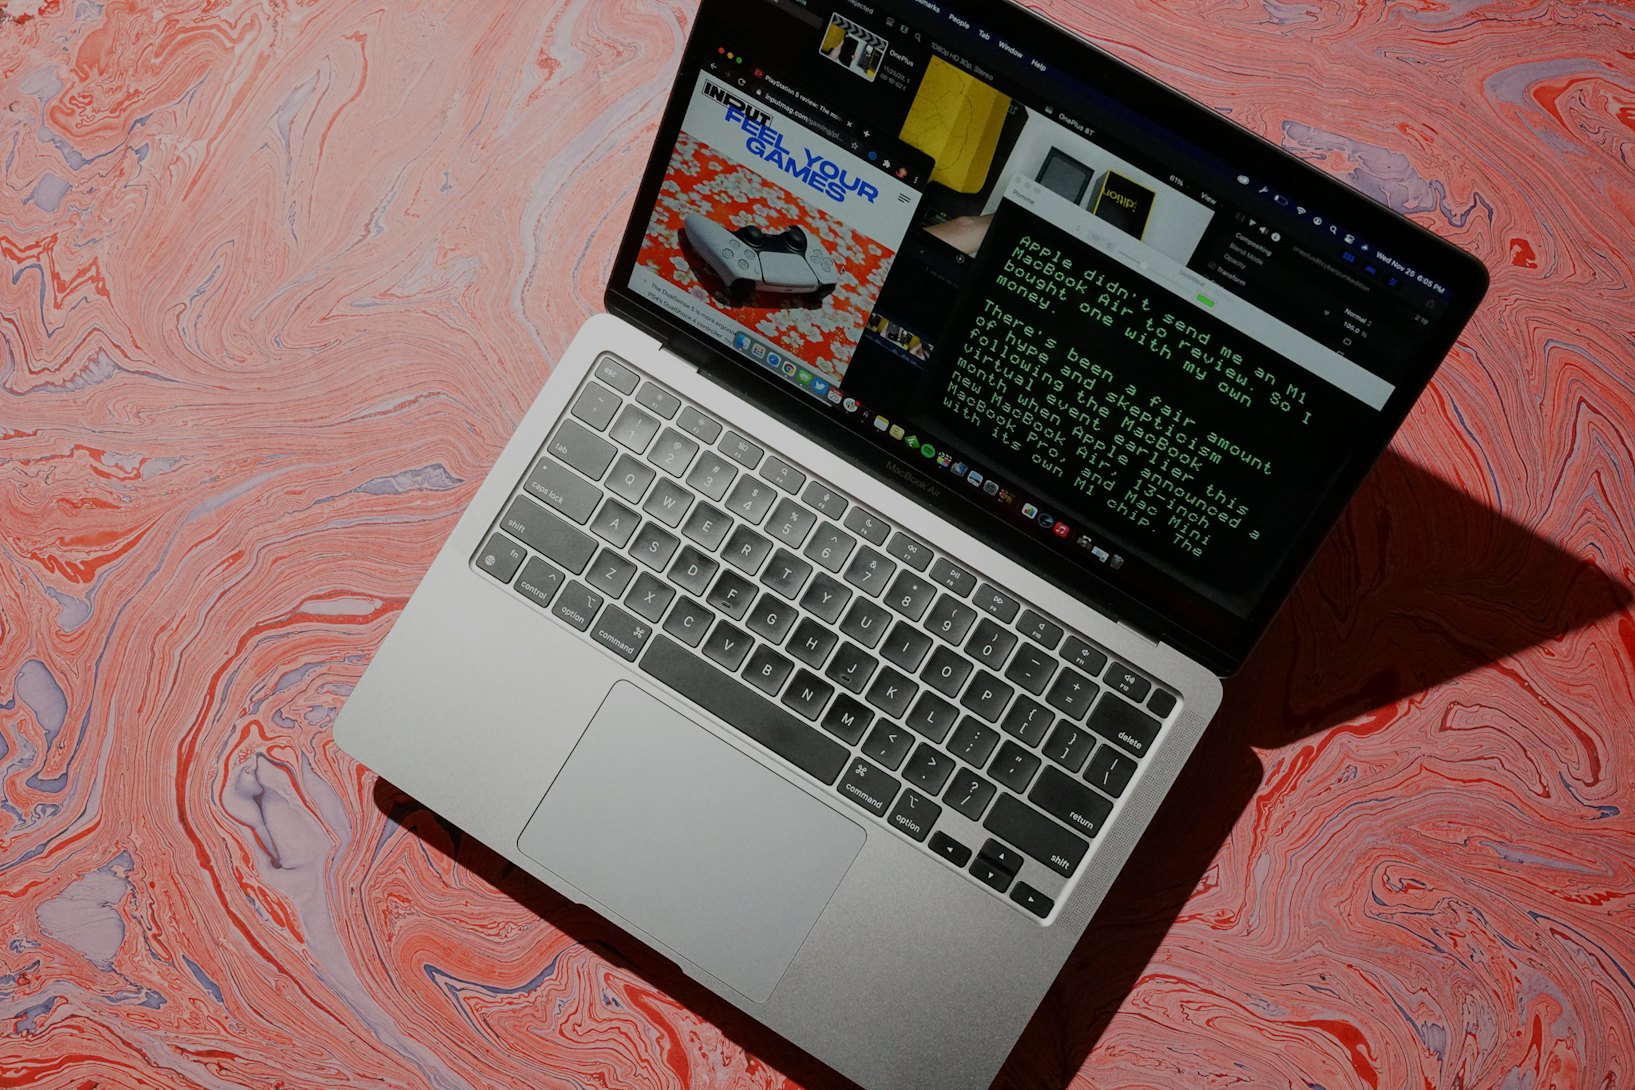 MacBook Air M1 review: Windows laptops are so screwed